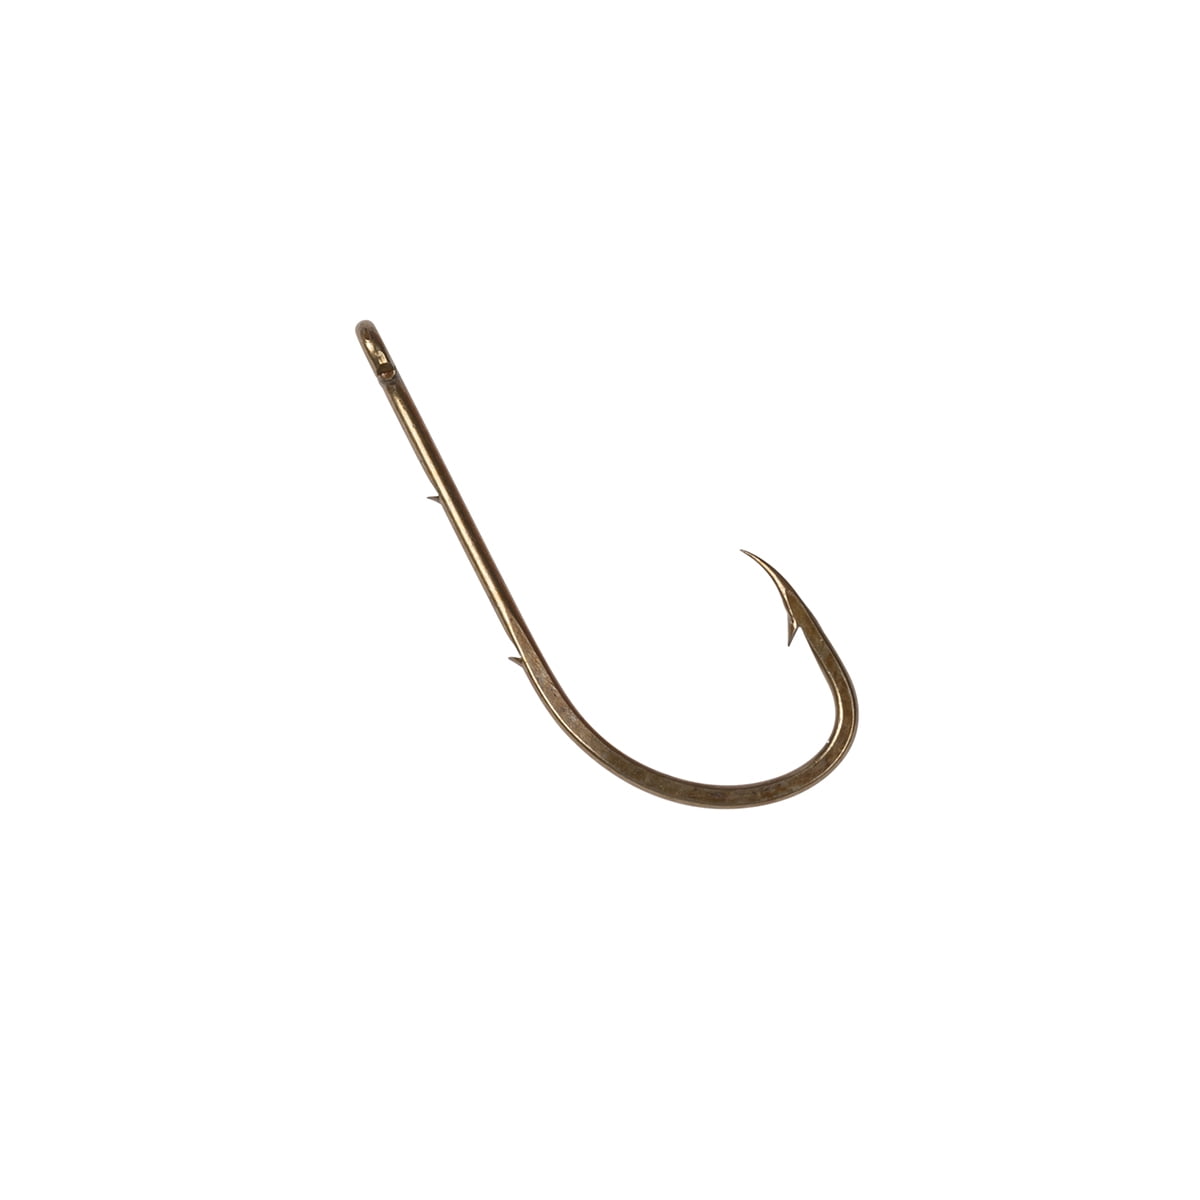 KAHLE HORIZONAL HOOKS GOLD Size 14 100 count USA PAN FISH,CRAPPIE 